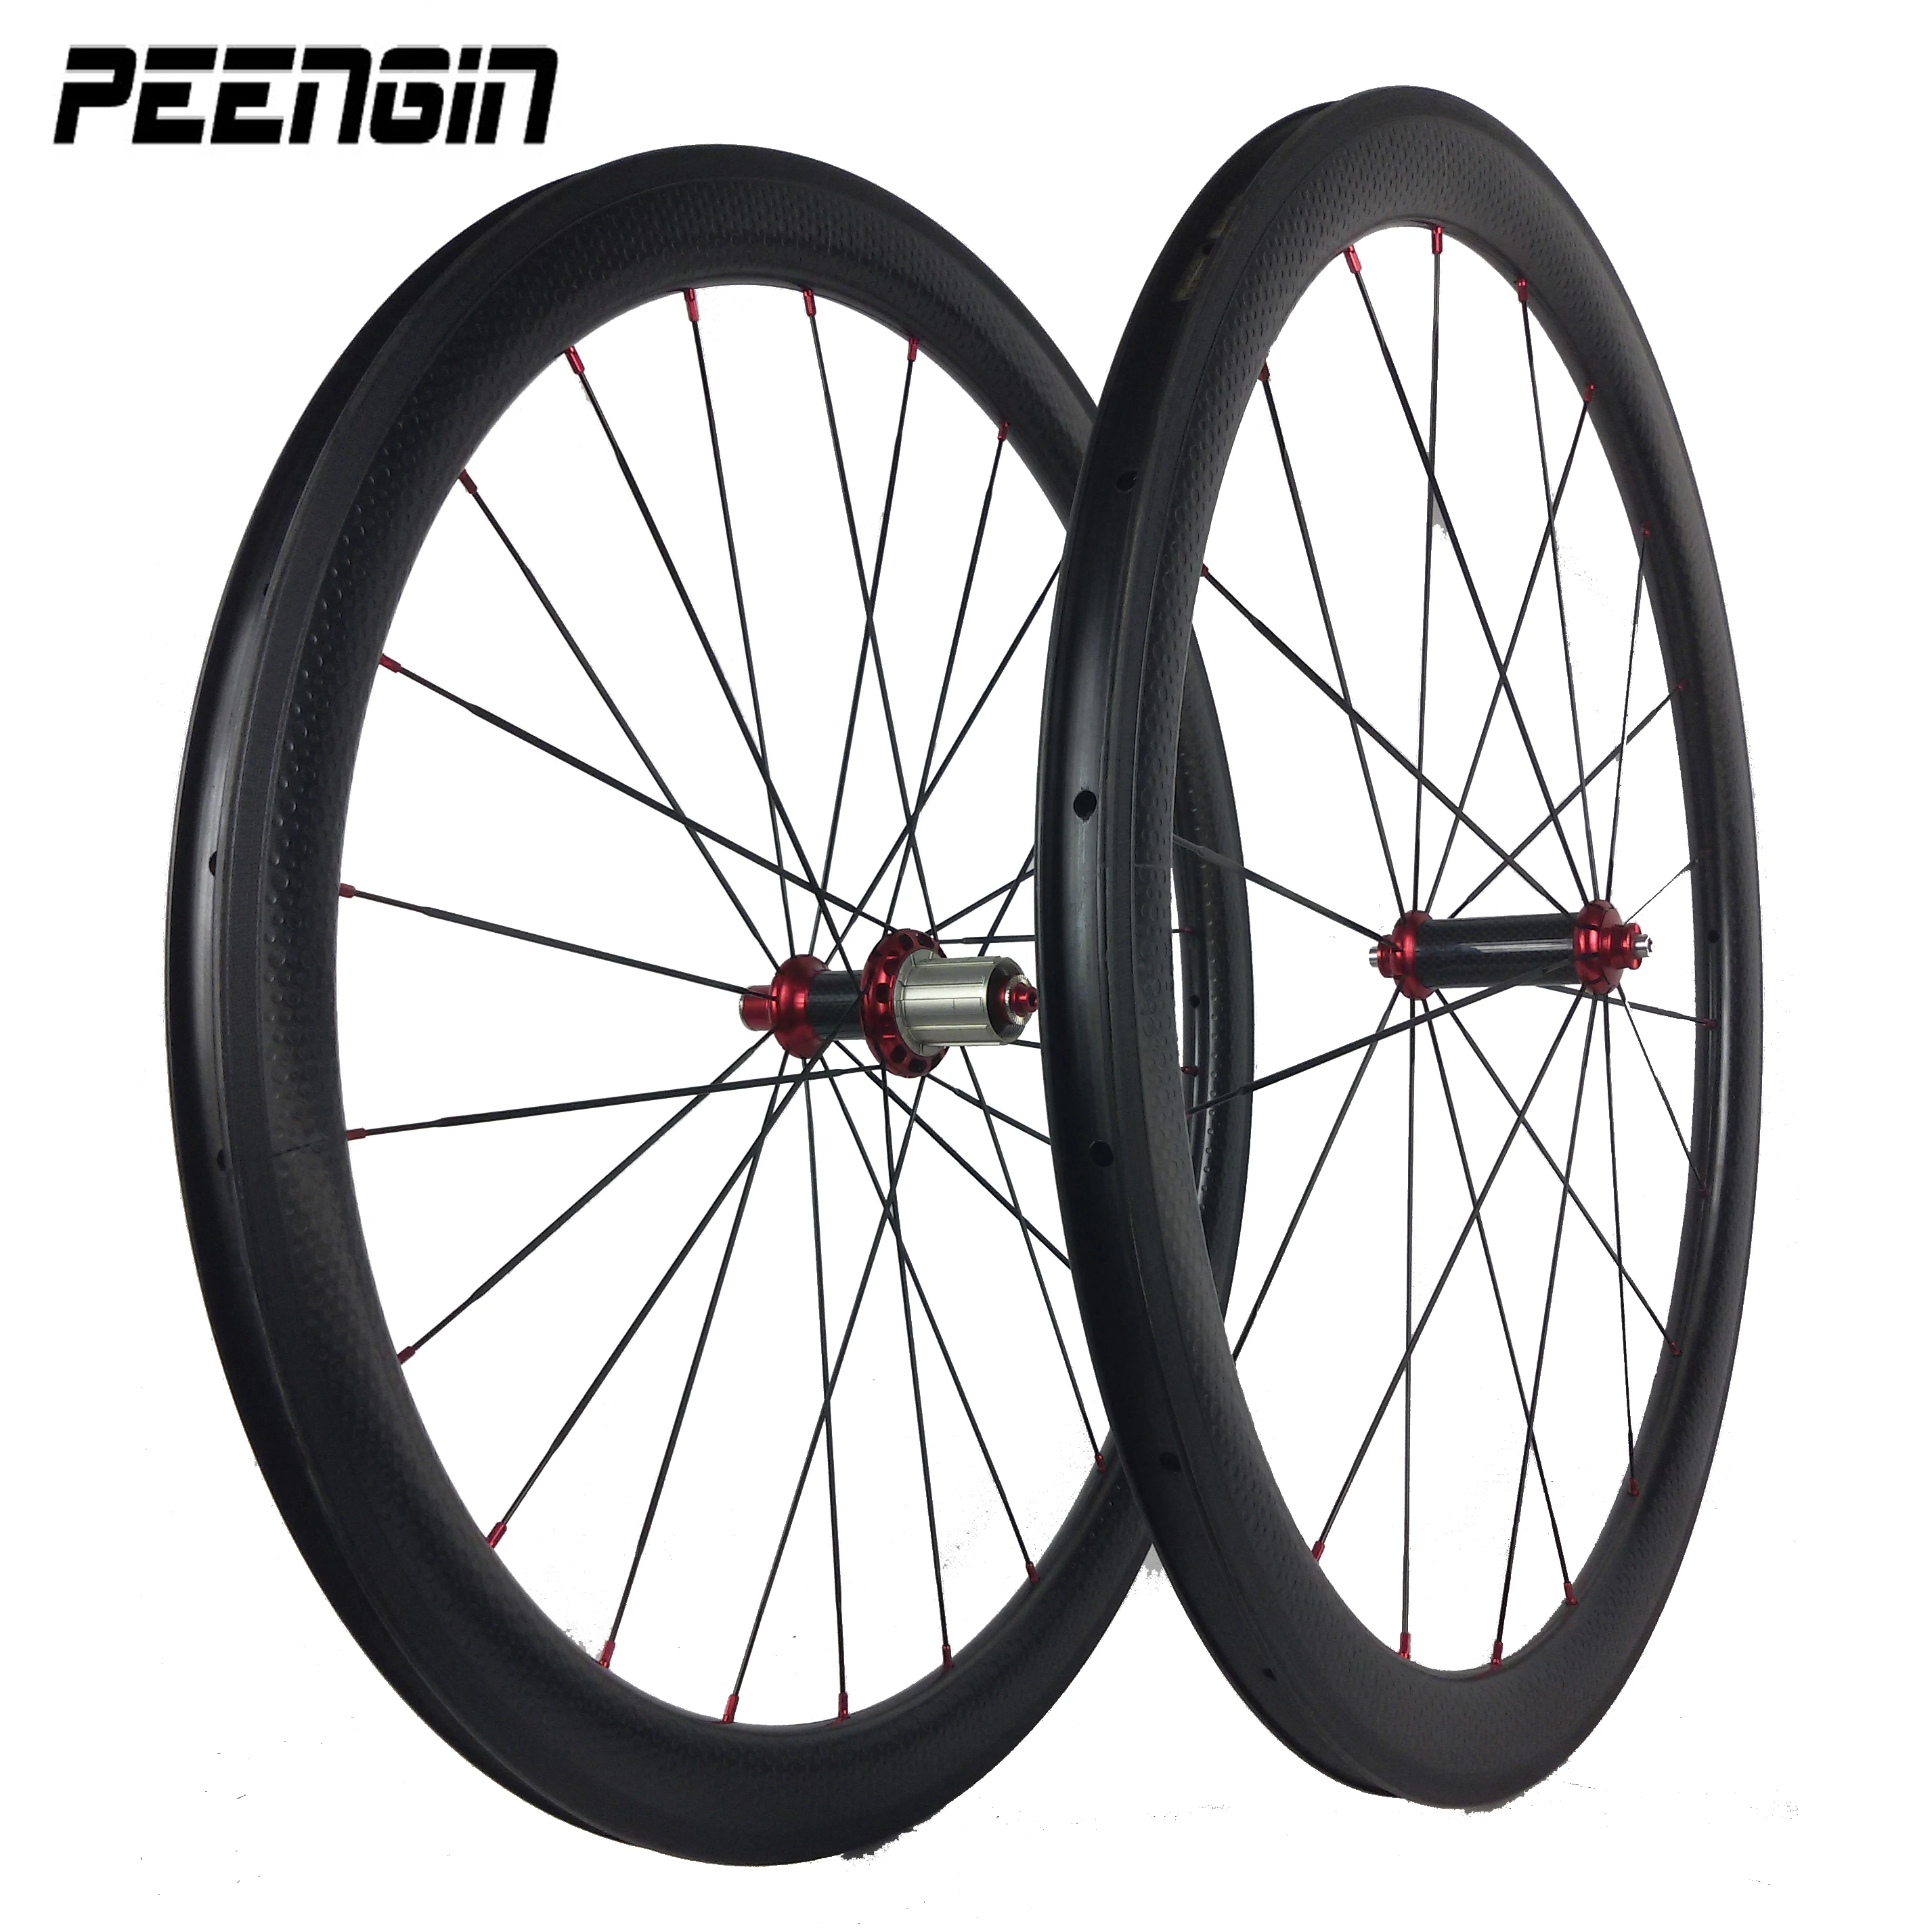 700C Carbon Dimple Bike Wheels With Basalt Brake Appearance 45mm Deep 26mm Wide Glof Balls Mooncapes Bicycle Wheelset Front/Rear